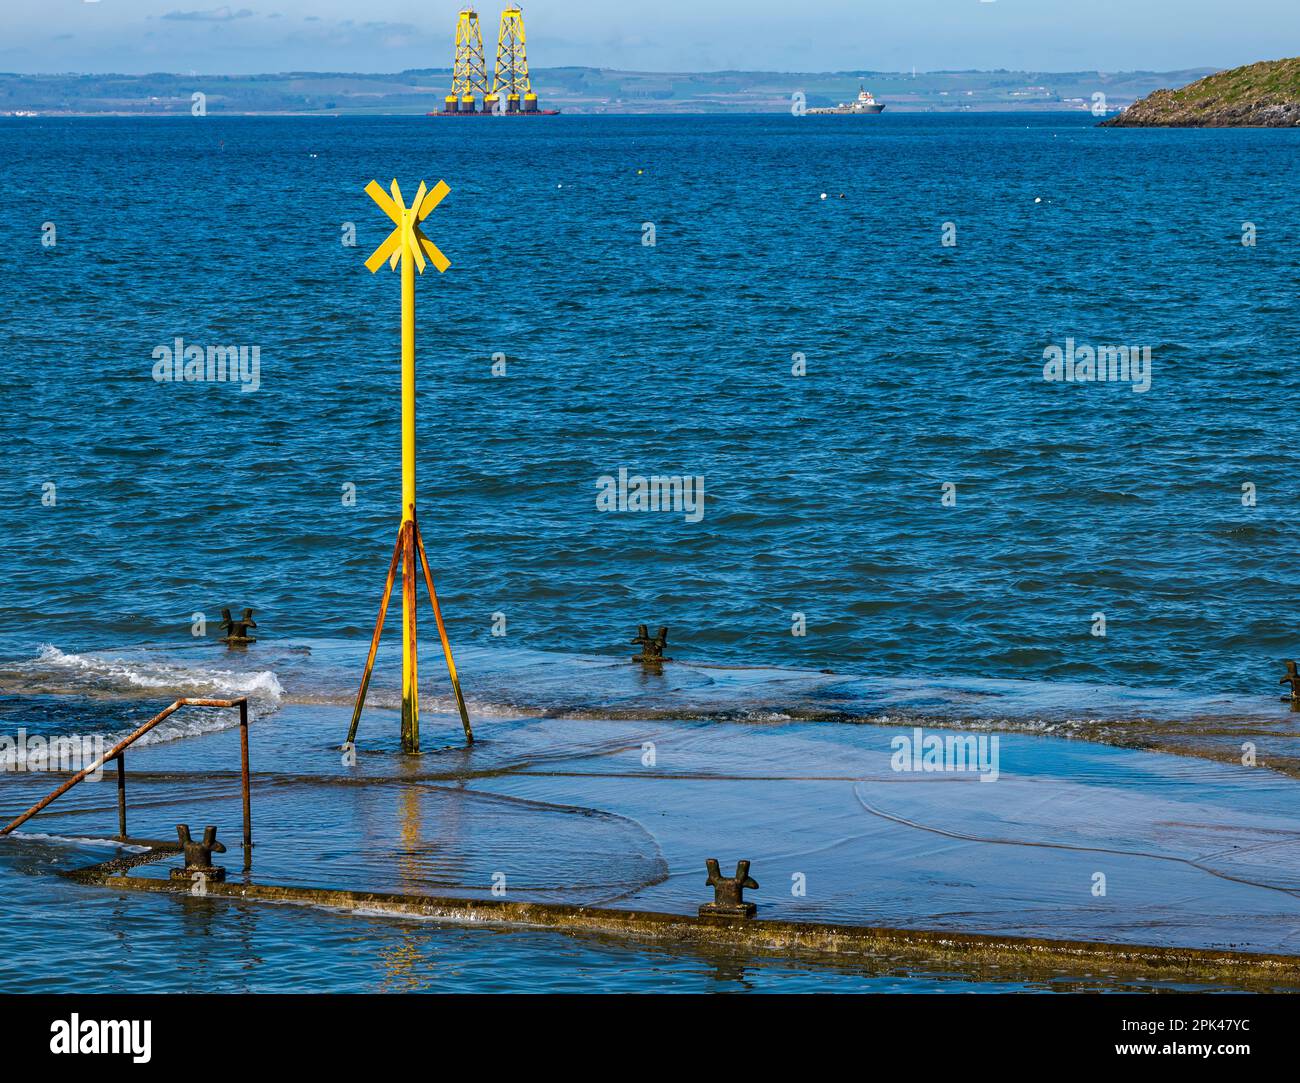 Ship towing barge with yellow wind turbine platforms out to North Sea, North Berwick, Firth of Forth, Scotland, UK Stock Photo